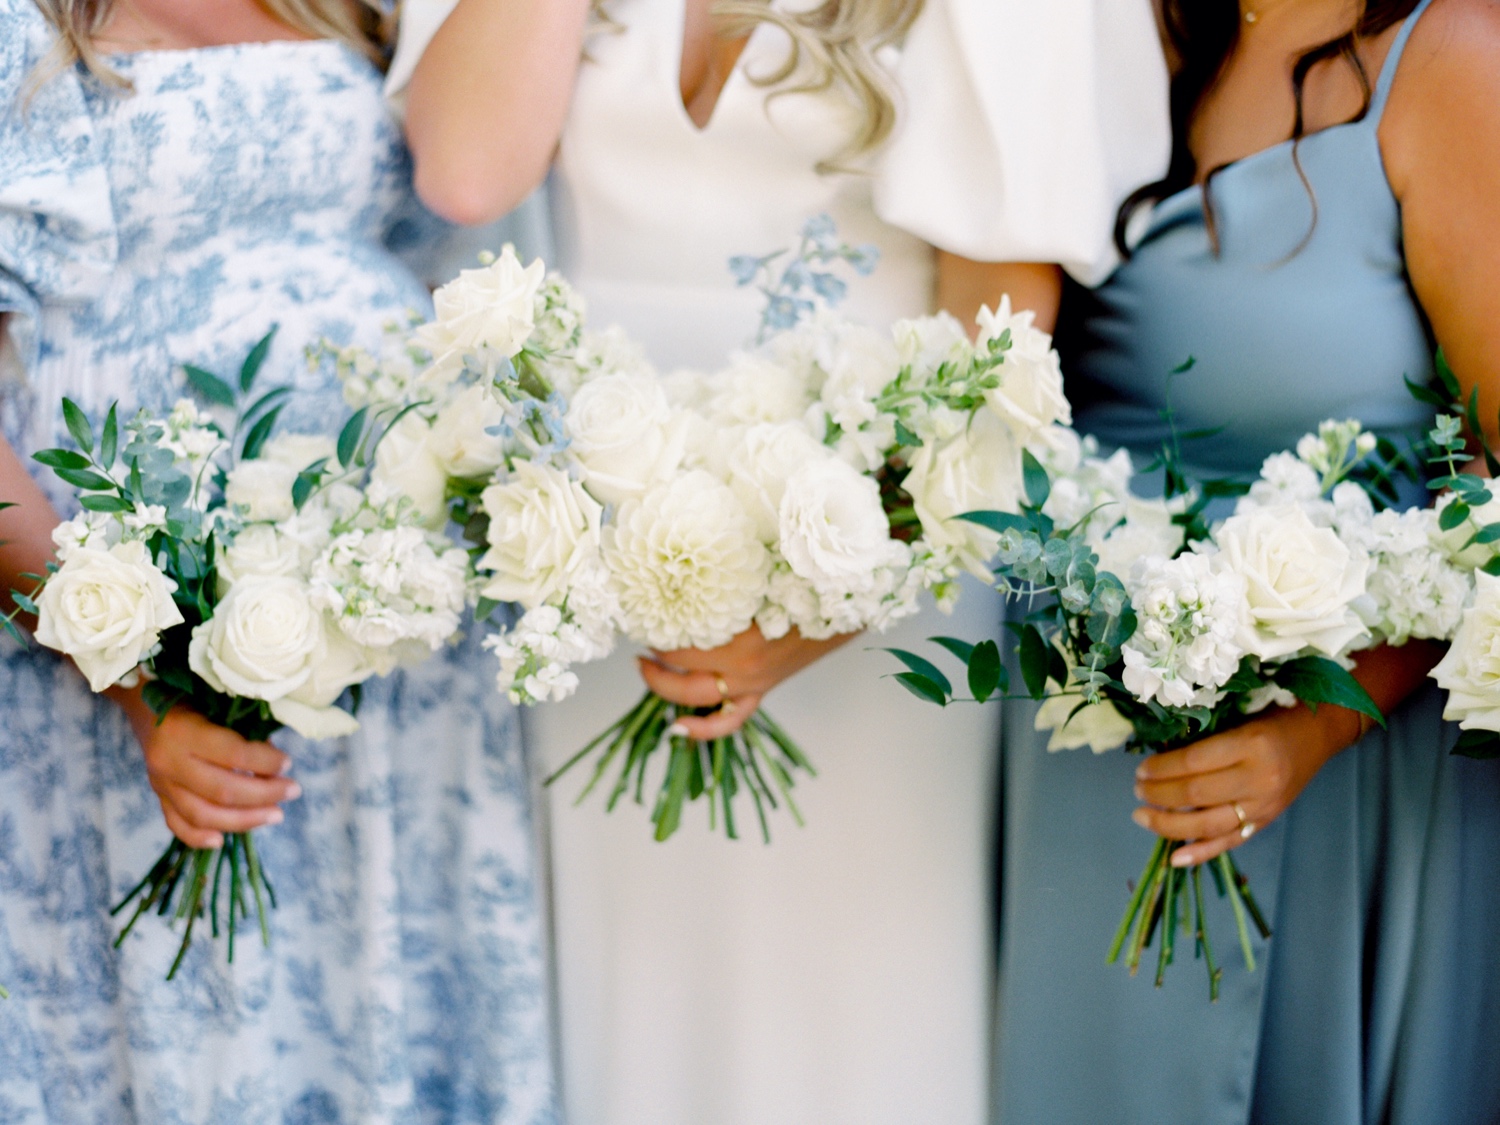 bride and bridesmaids bouquets for southern wedding at abeja winery